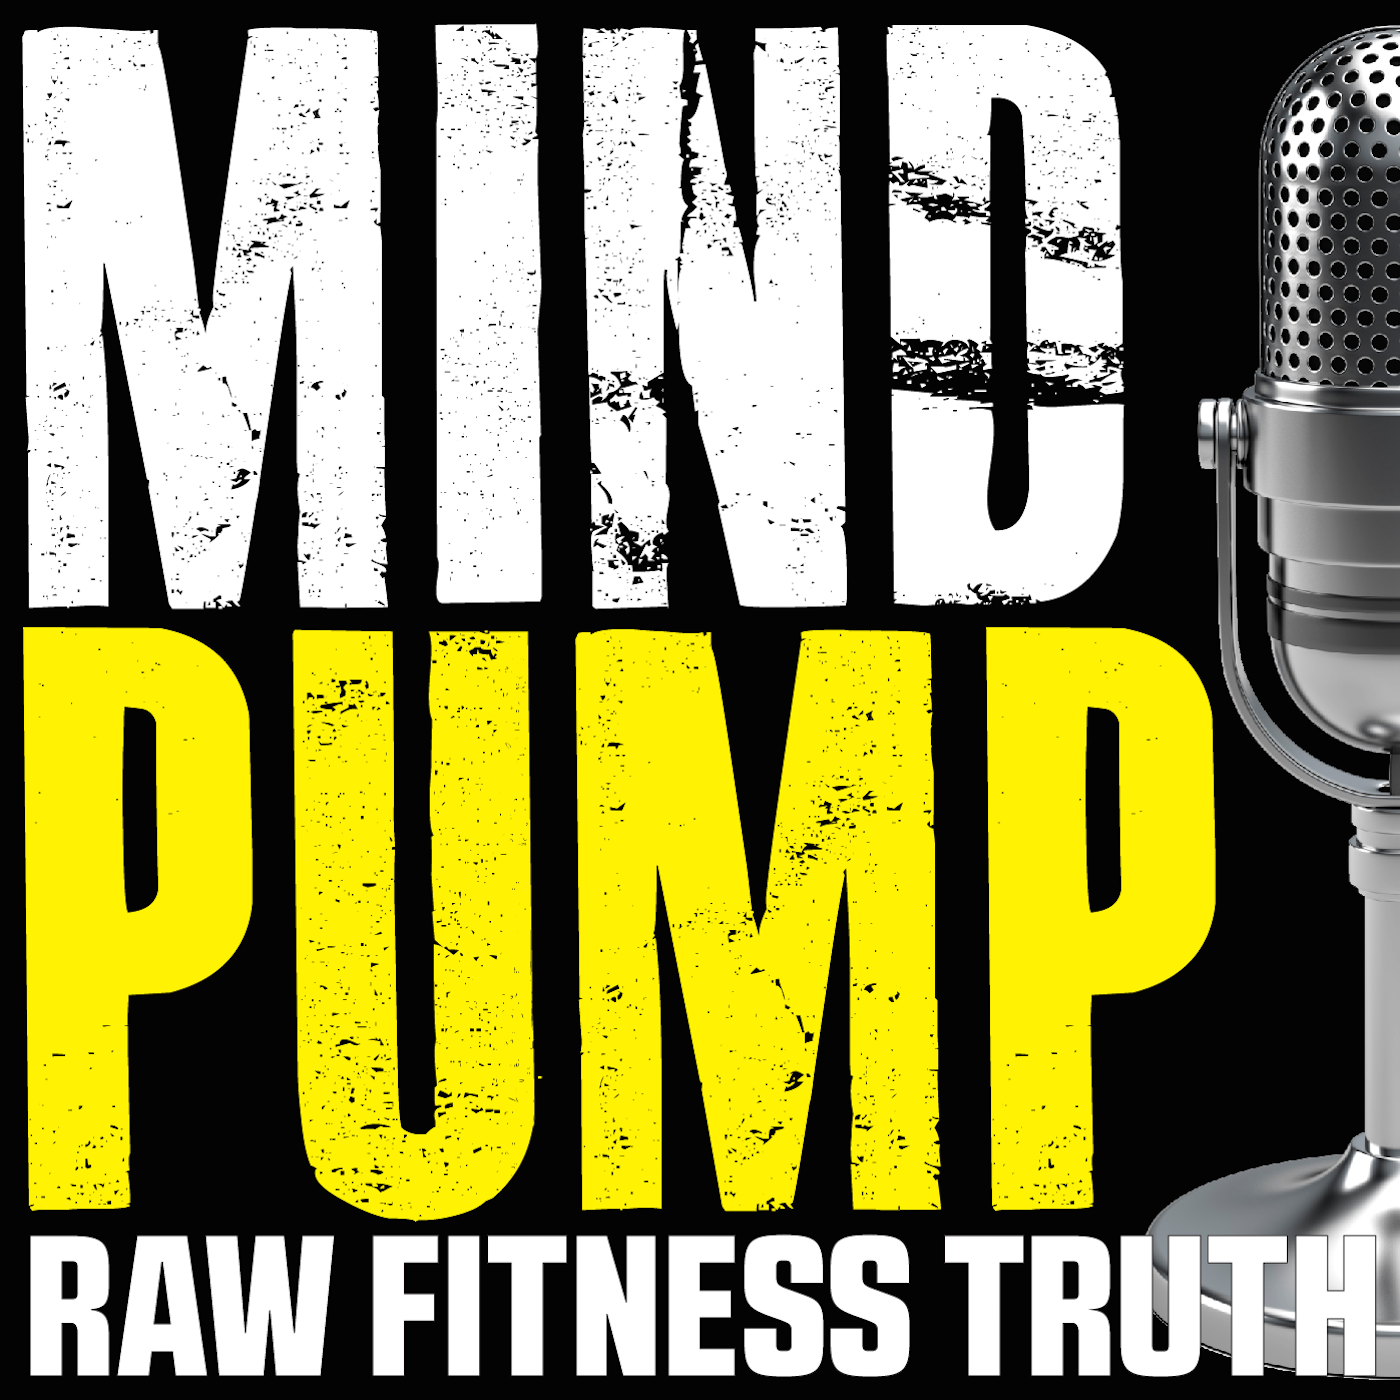 030: The Future of Fitness